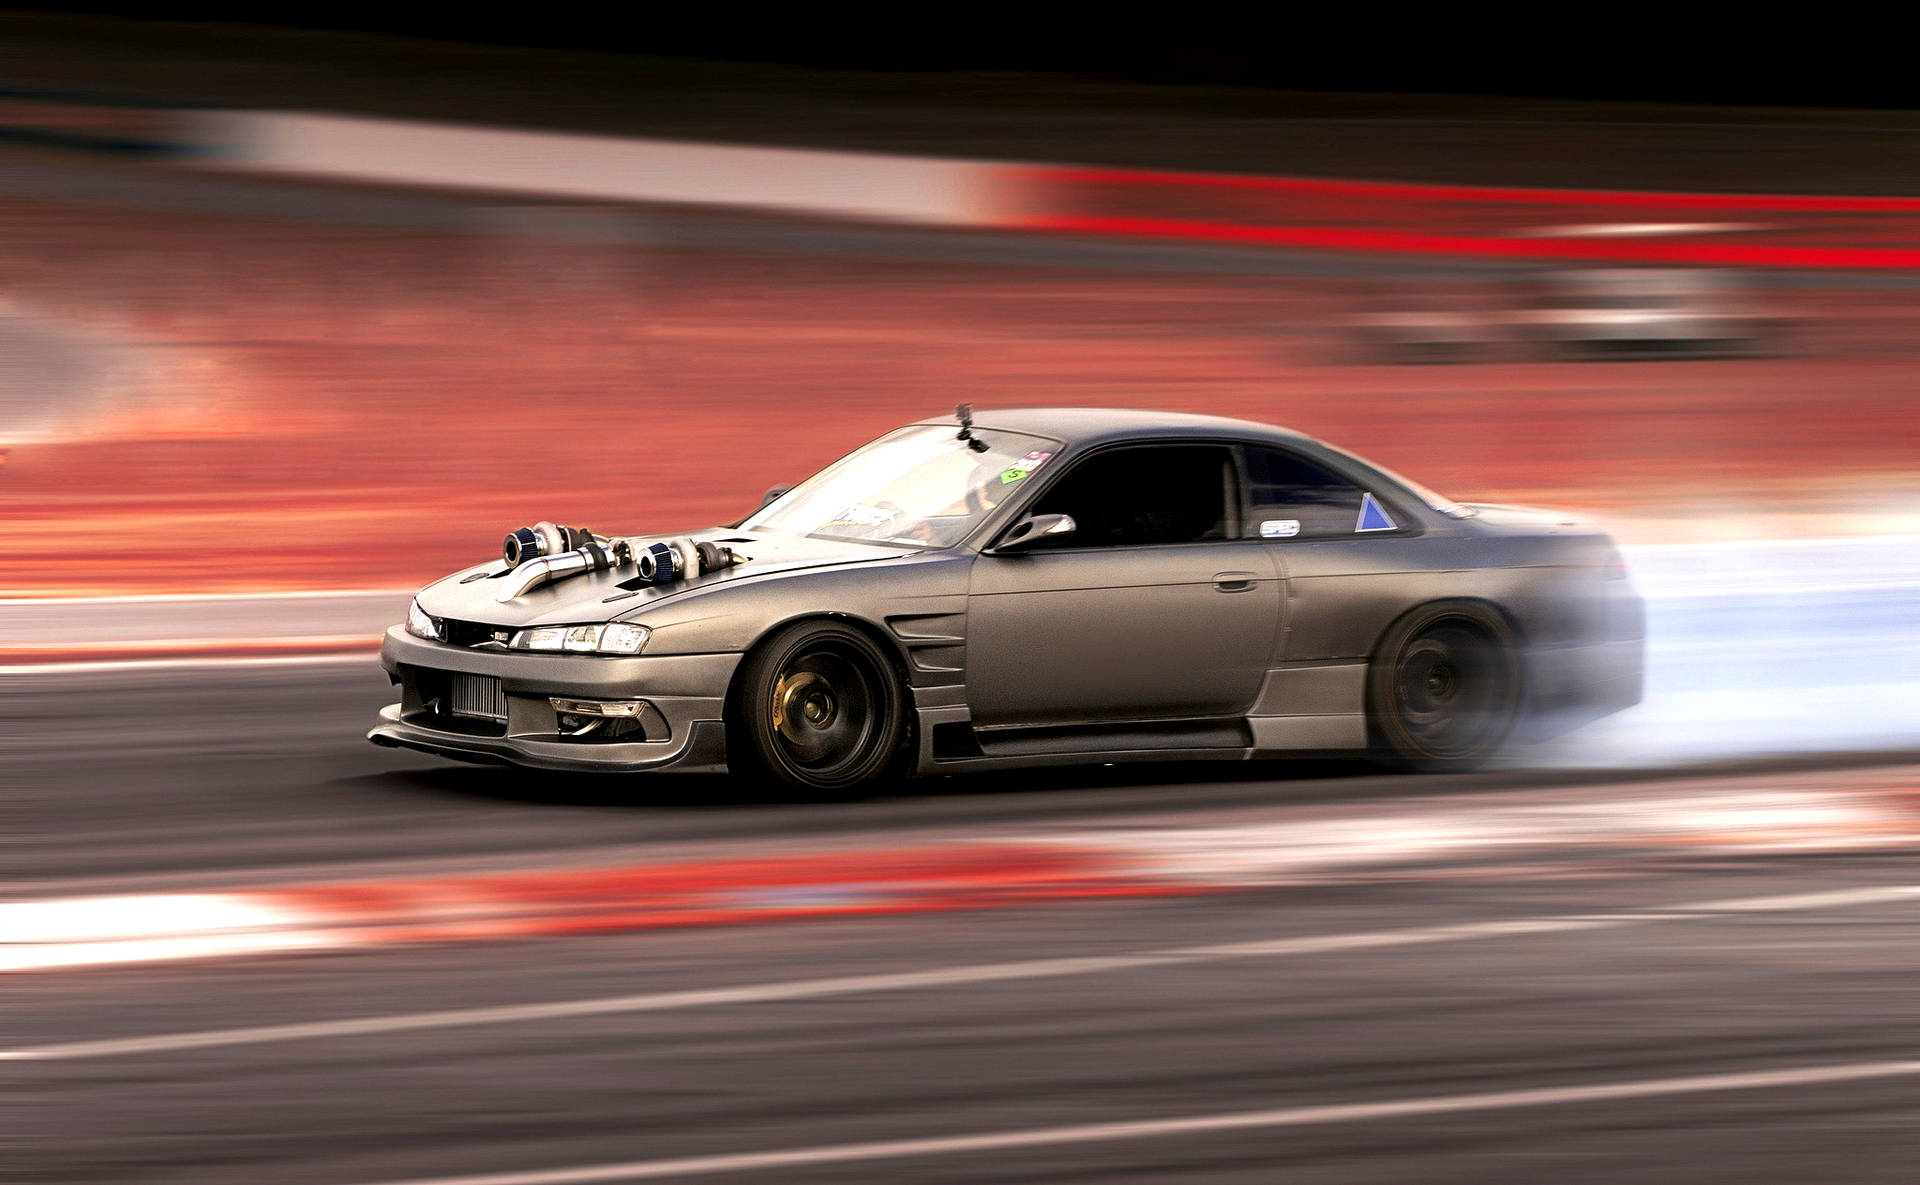 Nissan Silvia S14 Wallpapers HD Nissan Silvia S14 Backgrounds Free Images  Download